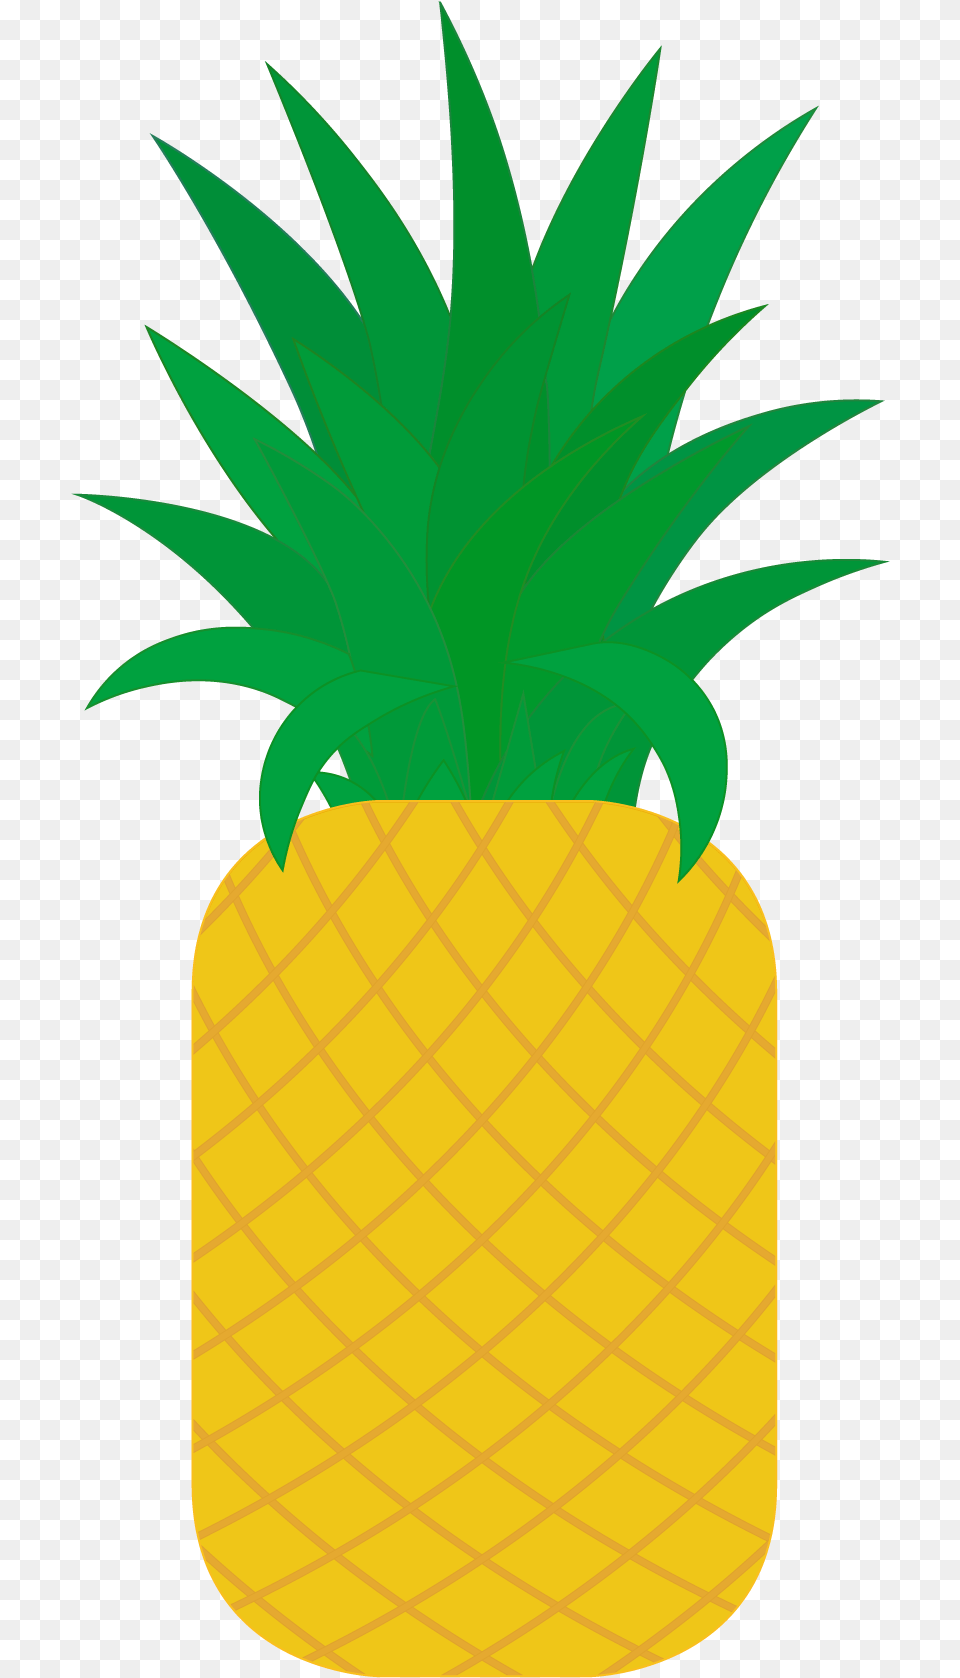 Flat Pineapple Poster Tropical Fruit And Vector Vector Fruit, Food, Plant, Produce Free Transparent Png